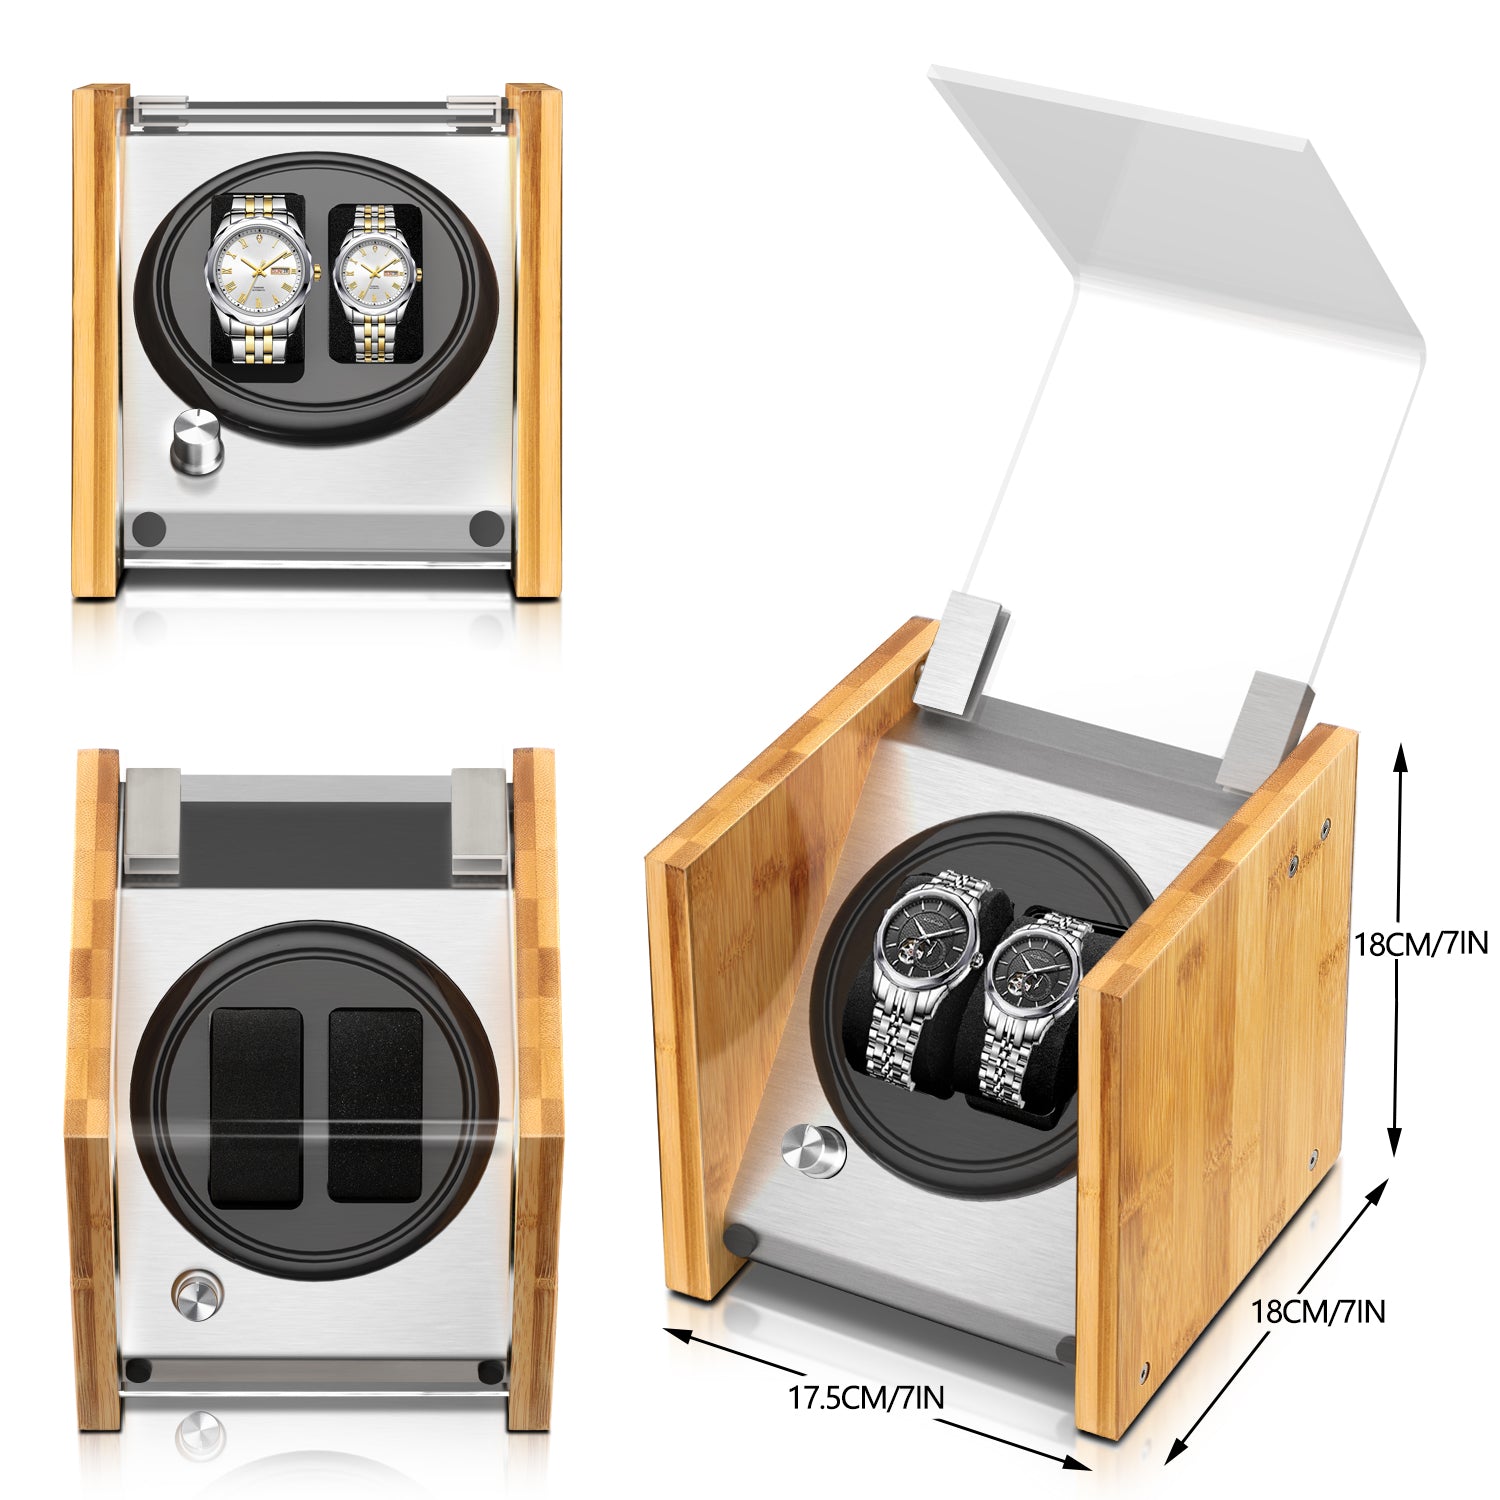 Watch Winder Double ｜ for Automatic Watches Handcraft Bamboo Wood Super Quiet by Watch Winder Smith®